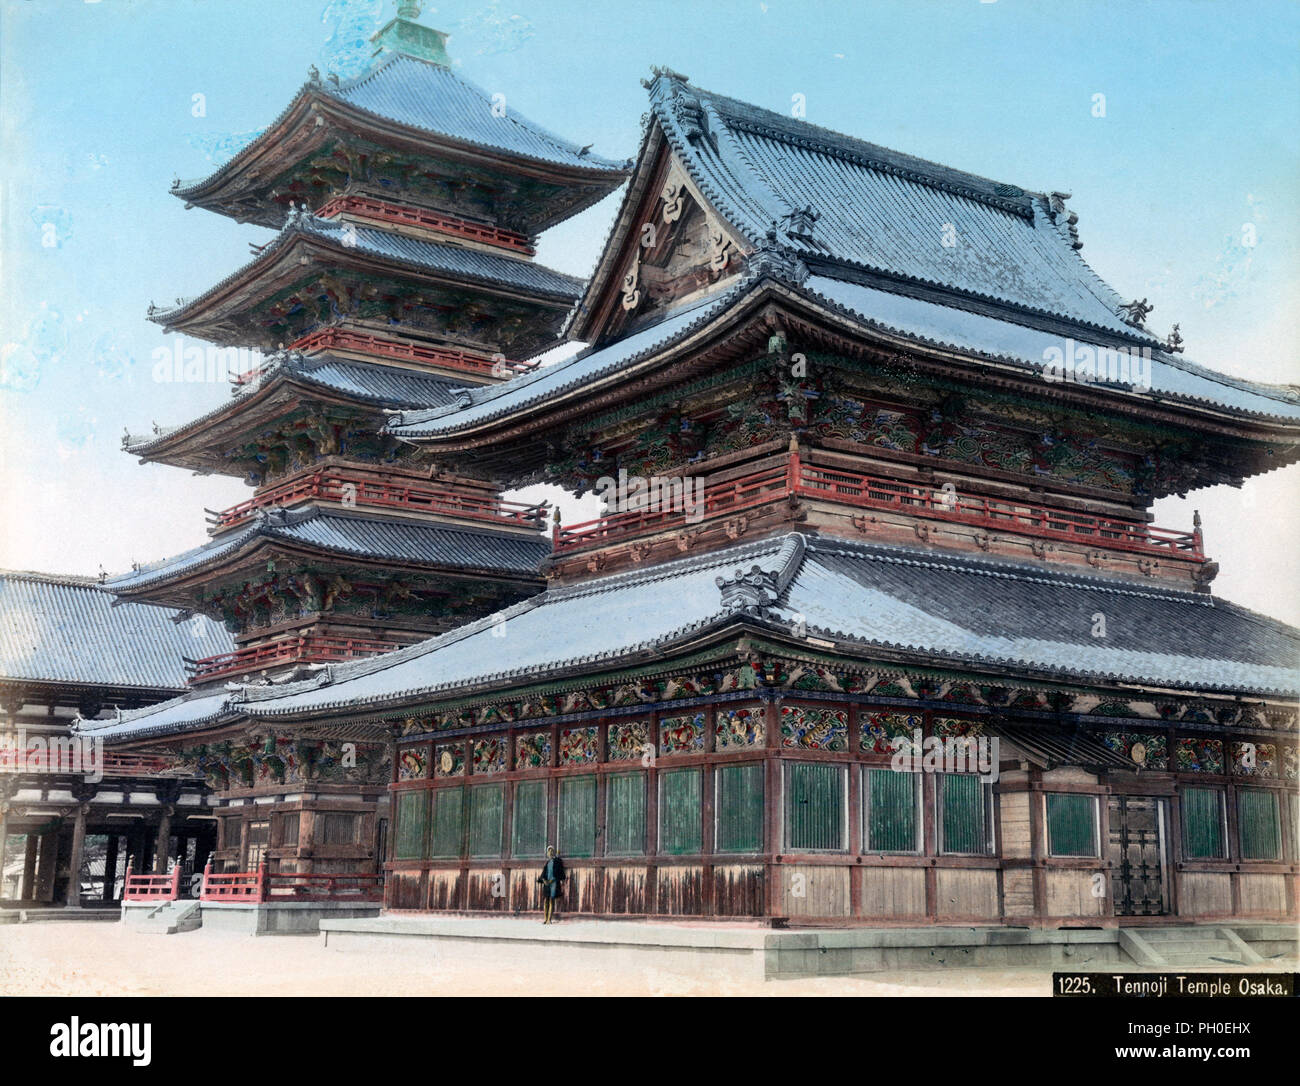 [ 1880s Japan - Shitennoji Temple in Osaka ] —   The Kondo (Golden Hall) and the five-story pagoda at Shitennoji Temple in Osaka. Both are based in the center of the temple buildings. Shitennoji Temple was founded by Prince Shotoku (Shotoku Taishi, 574-622) in 593 during Japan’s first wave of temple construction. The Kondo and the pagoda, were completely destroyed by US firebombs in March 1945. In the early 1960s, they were rebuilt in concrete.  19th century vintage albumen photograph. Stock Photo